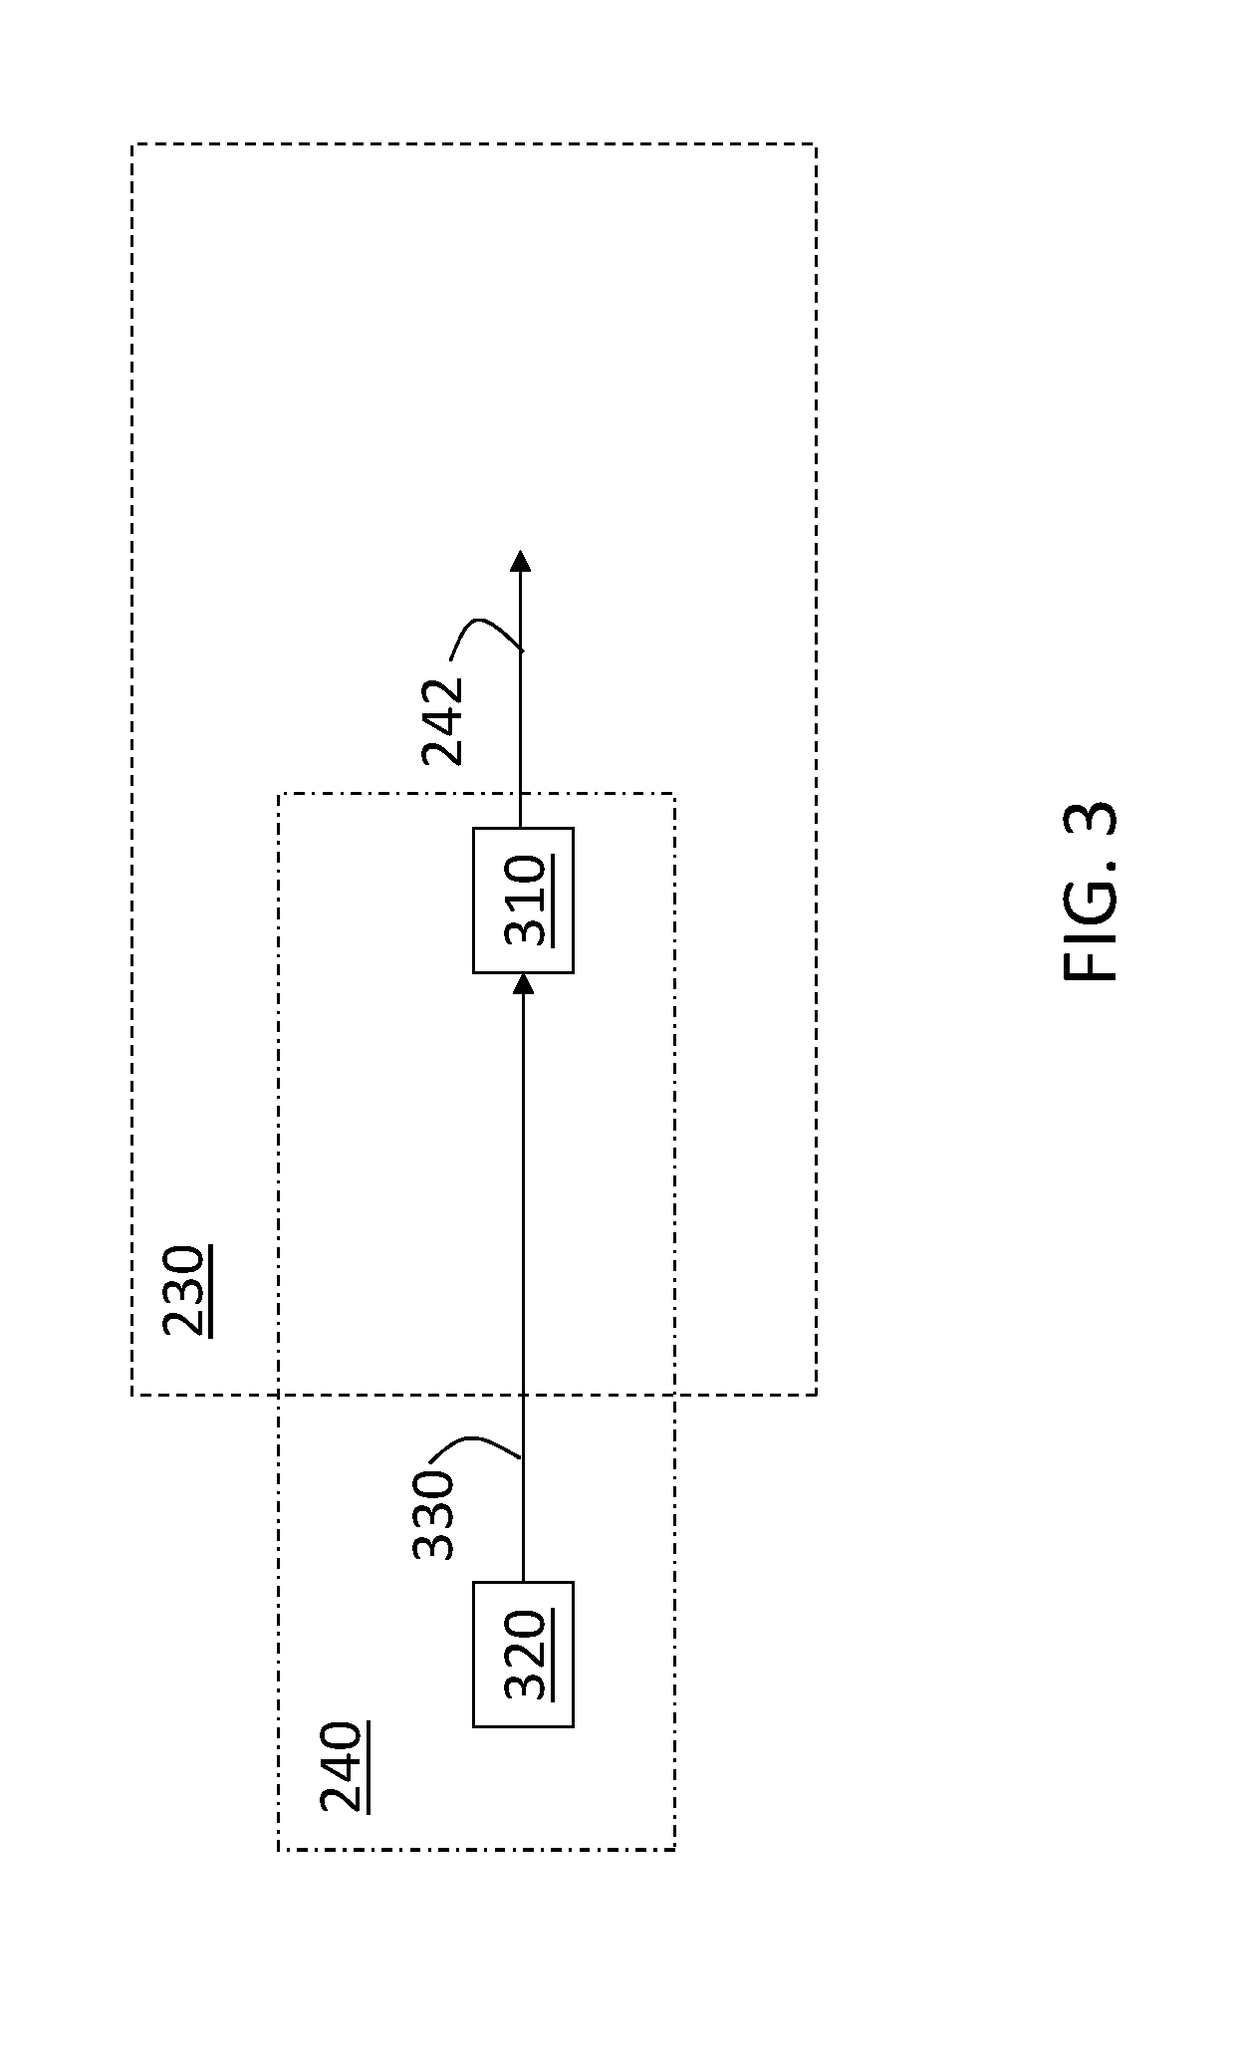 Laser diode optical frequency modulation linearization algorithm